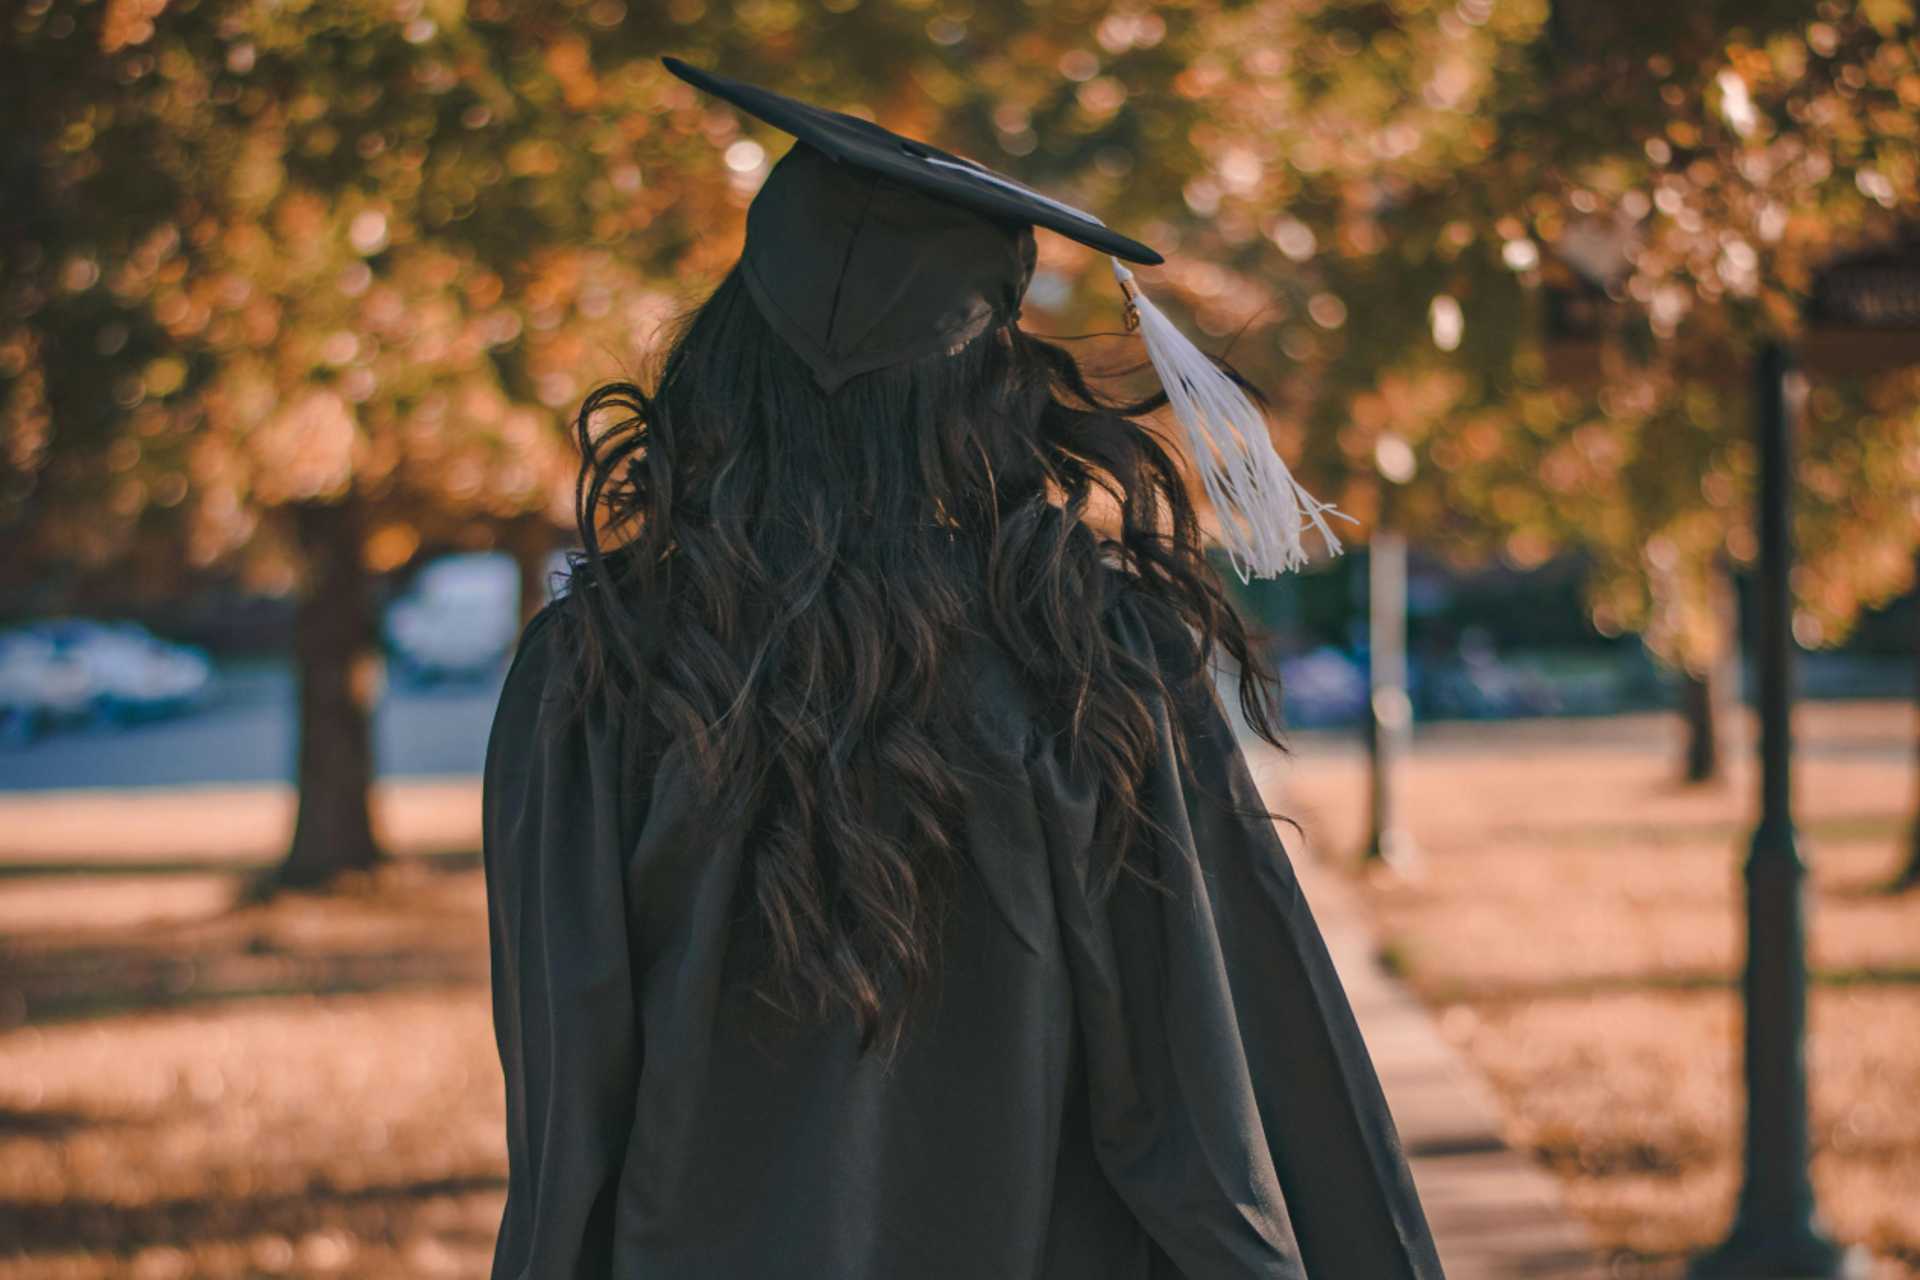 Woman walking away with grad hat and robe on